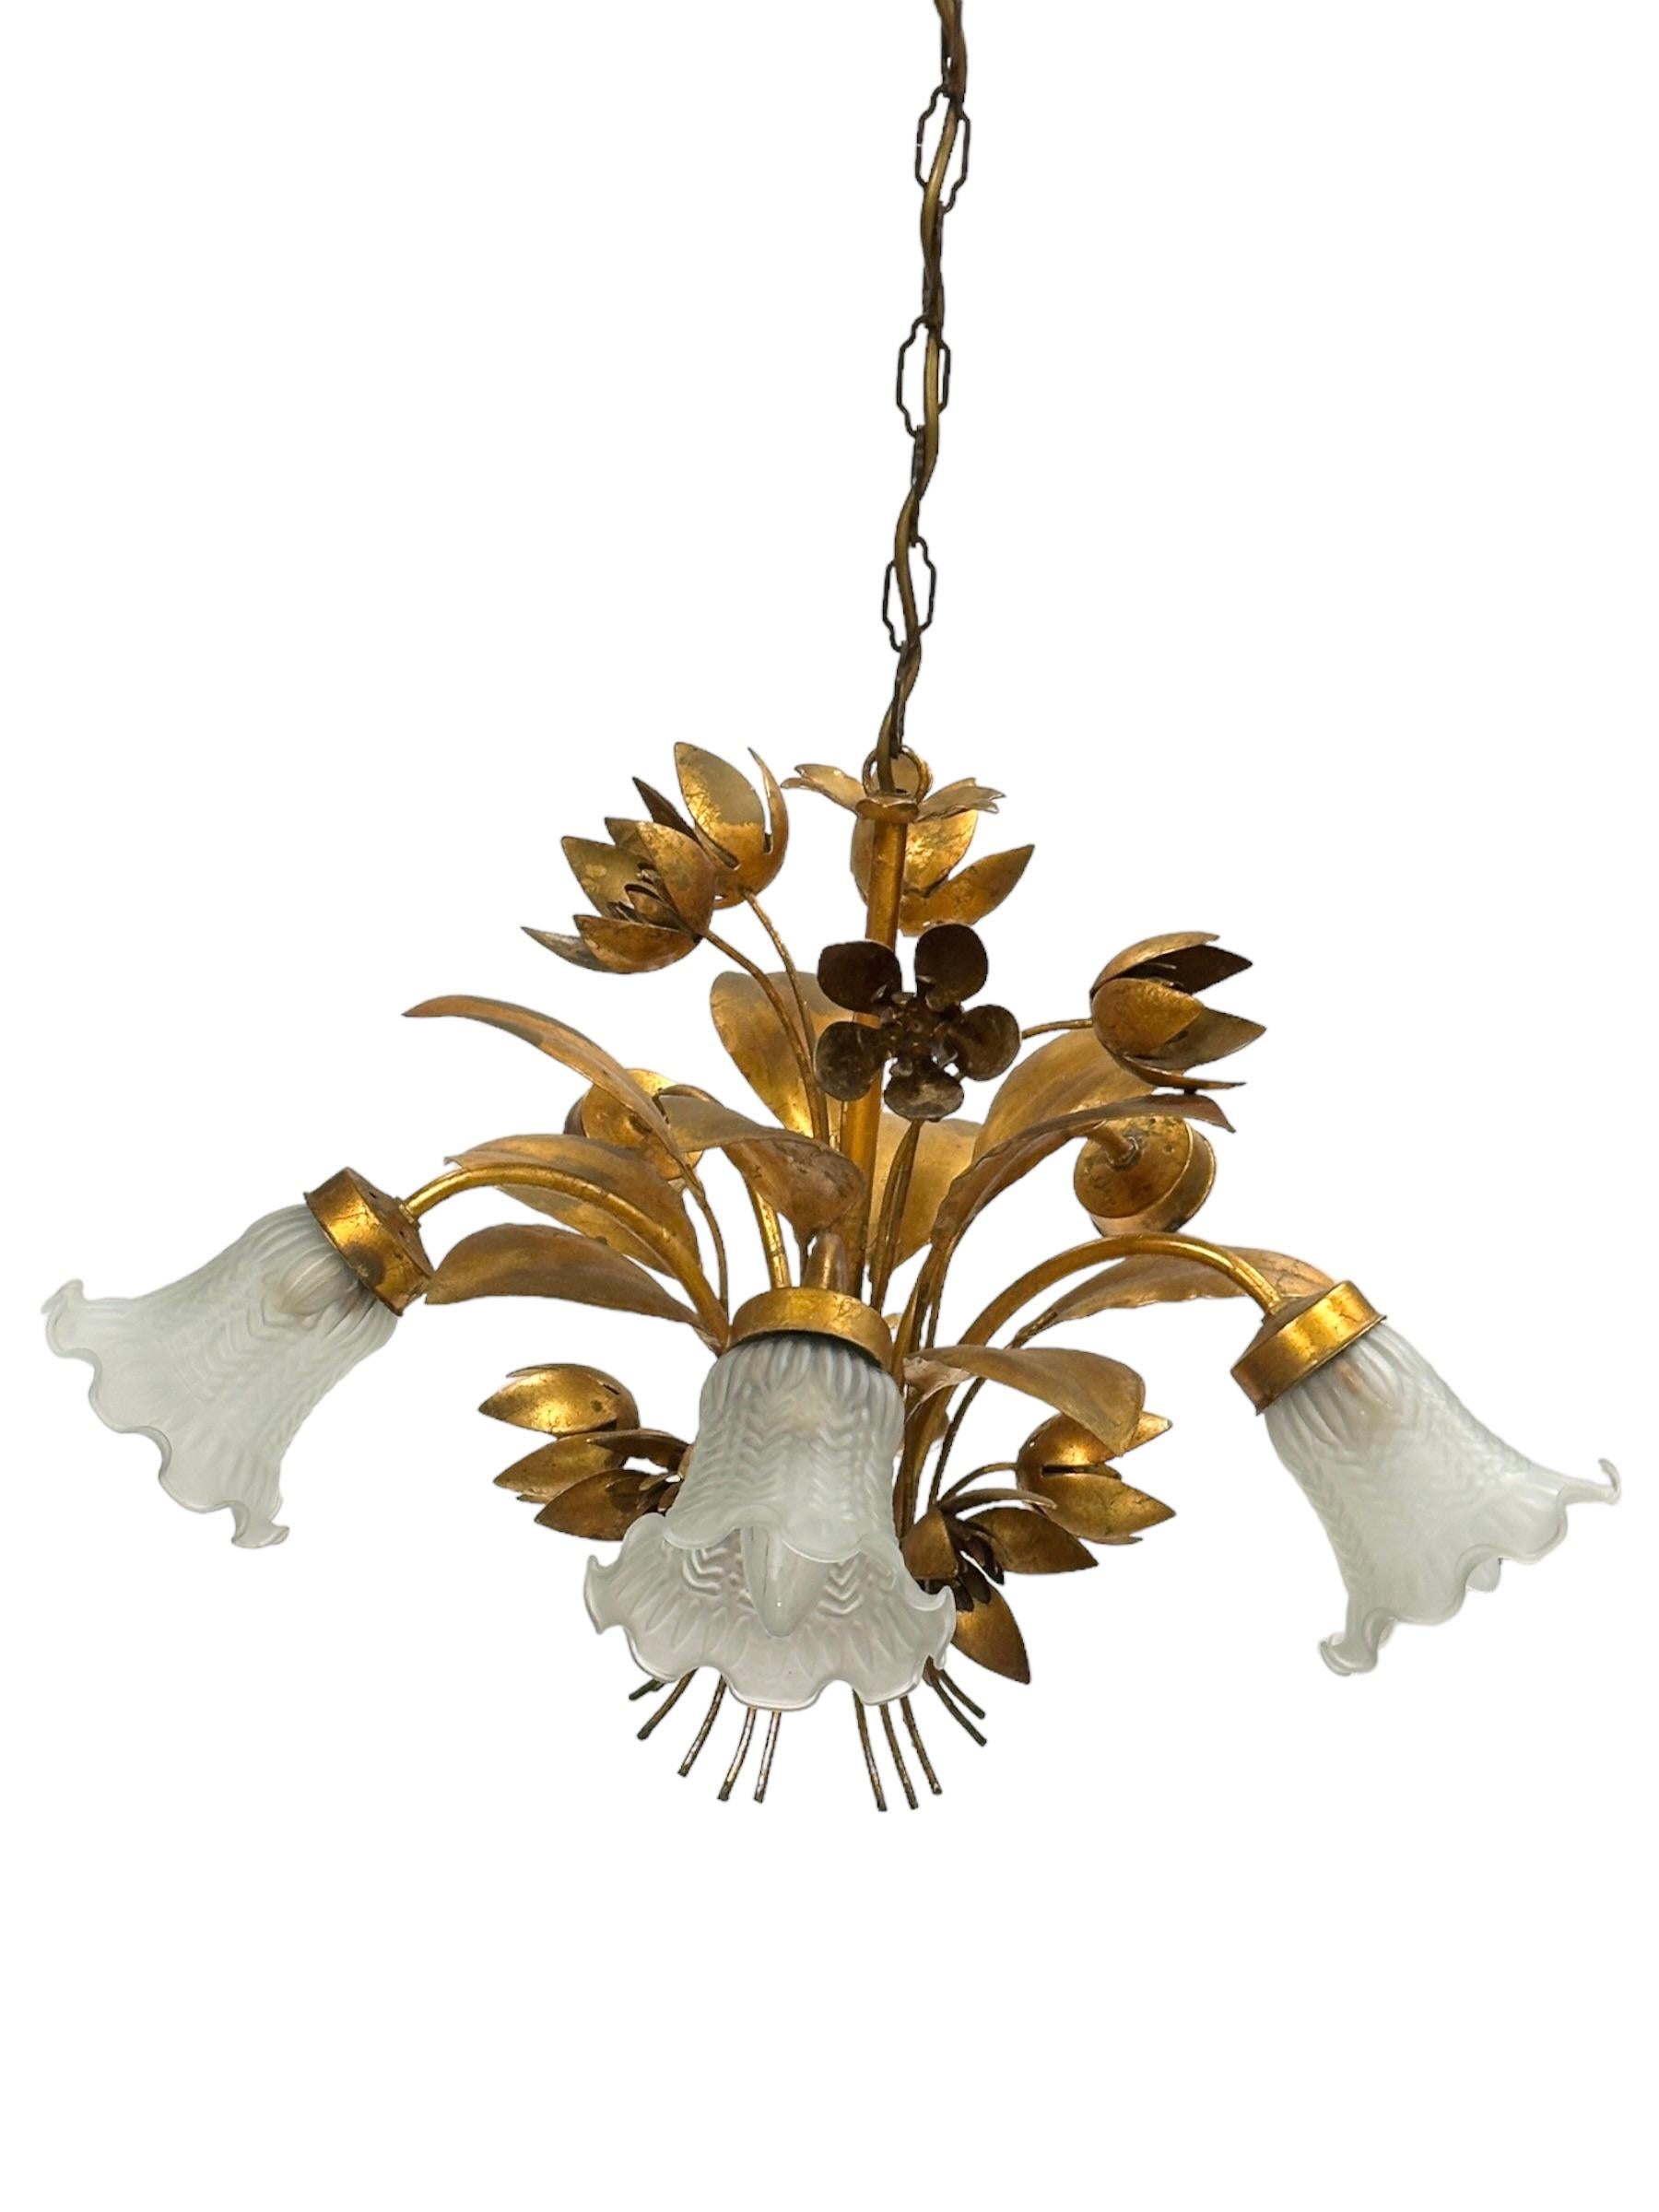 Mid-20th Century Gilt Metal & Glass Shade Five Light Chandelier Toleware Coco Chanel Style Italy  For Sale